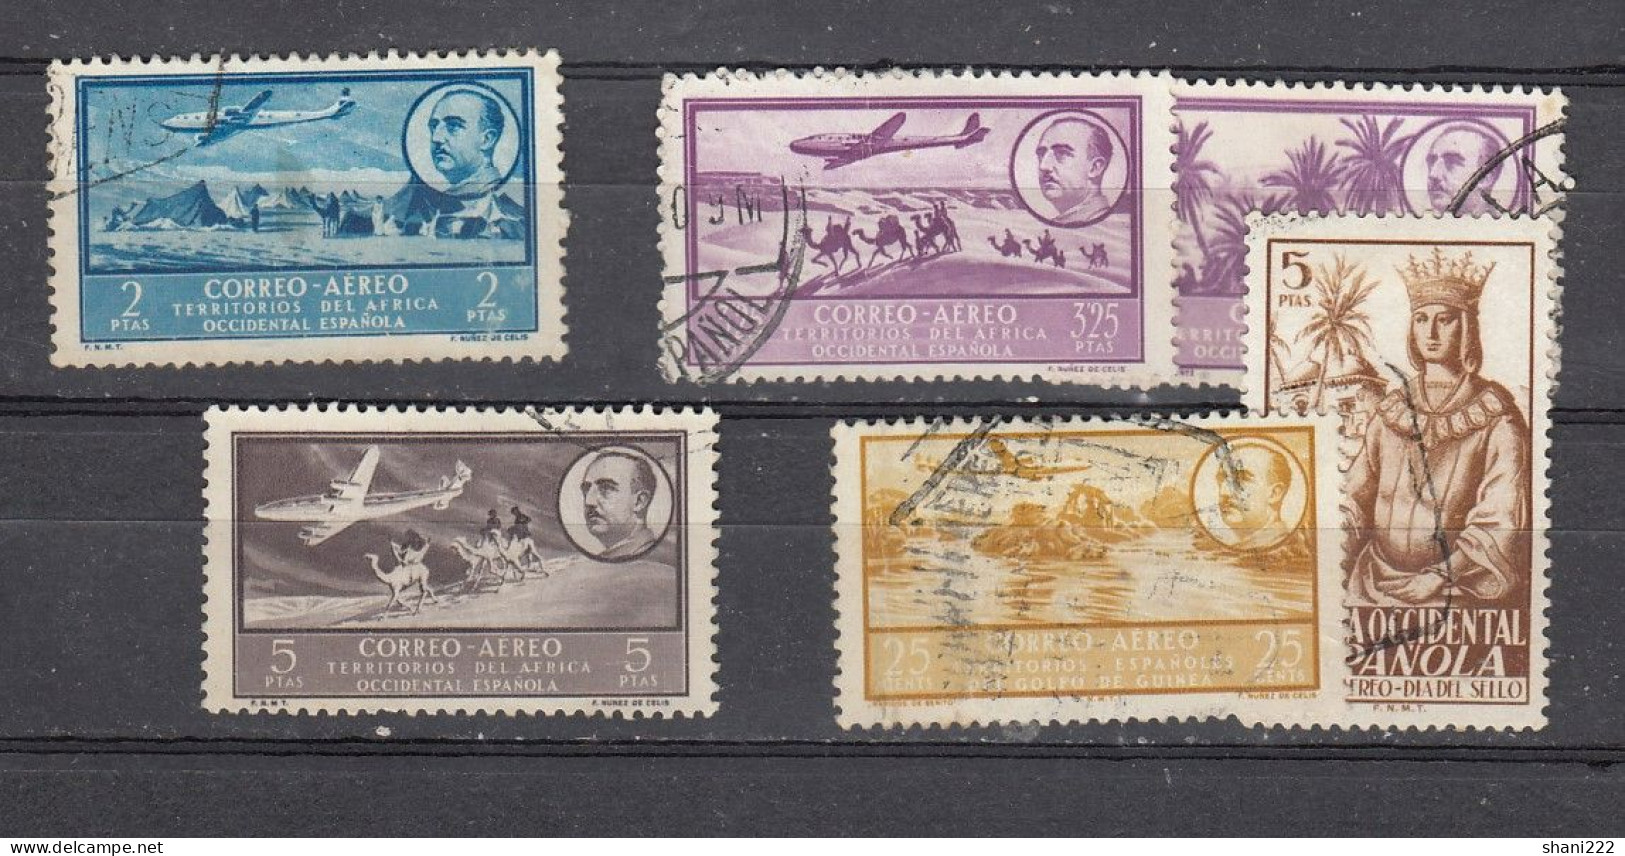 Spanish West Africa - 1951 -Airs - Some Used Items (e-750) - Spaanse Sahara